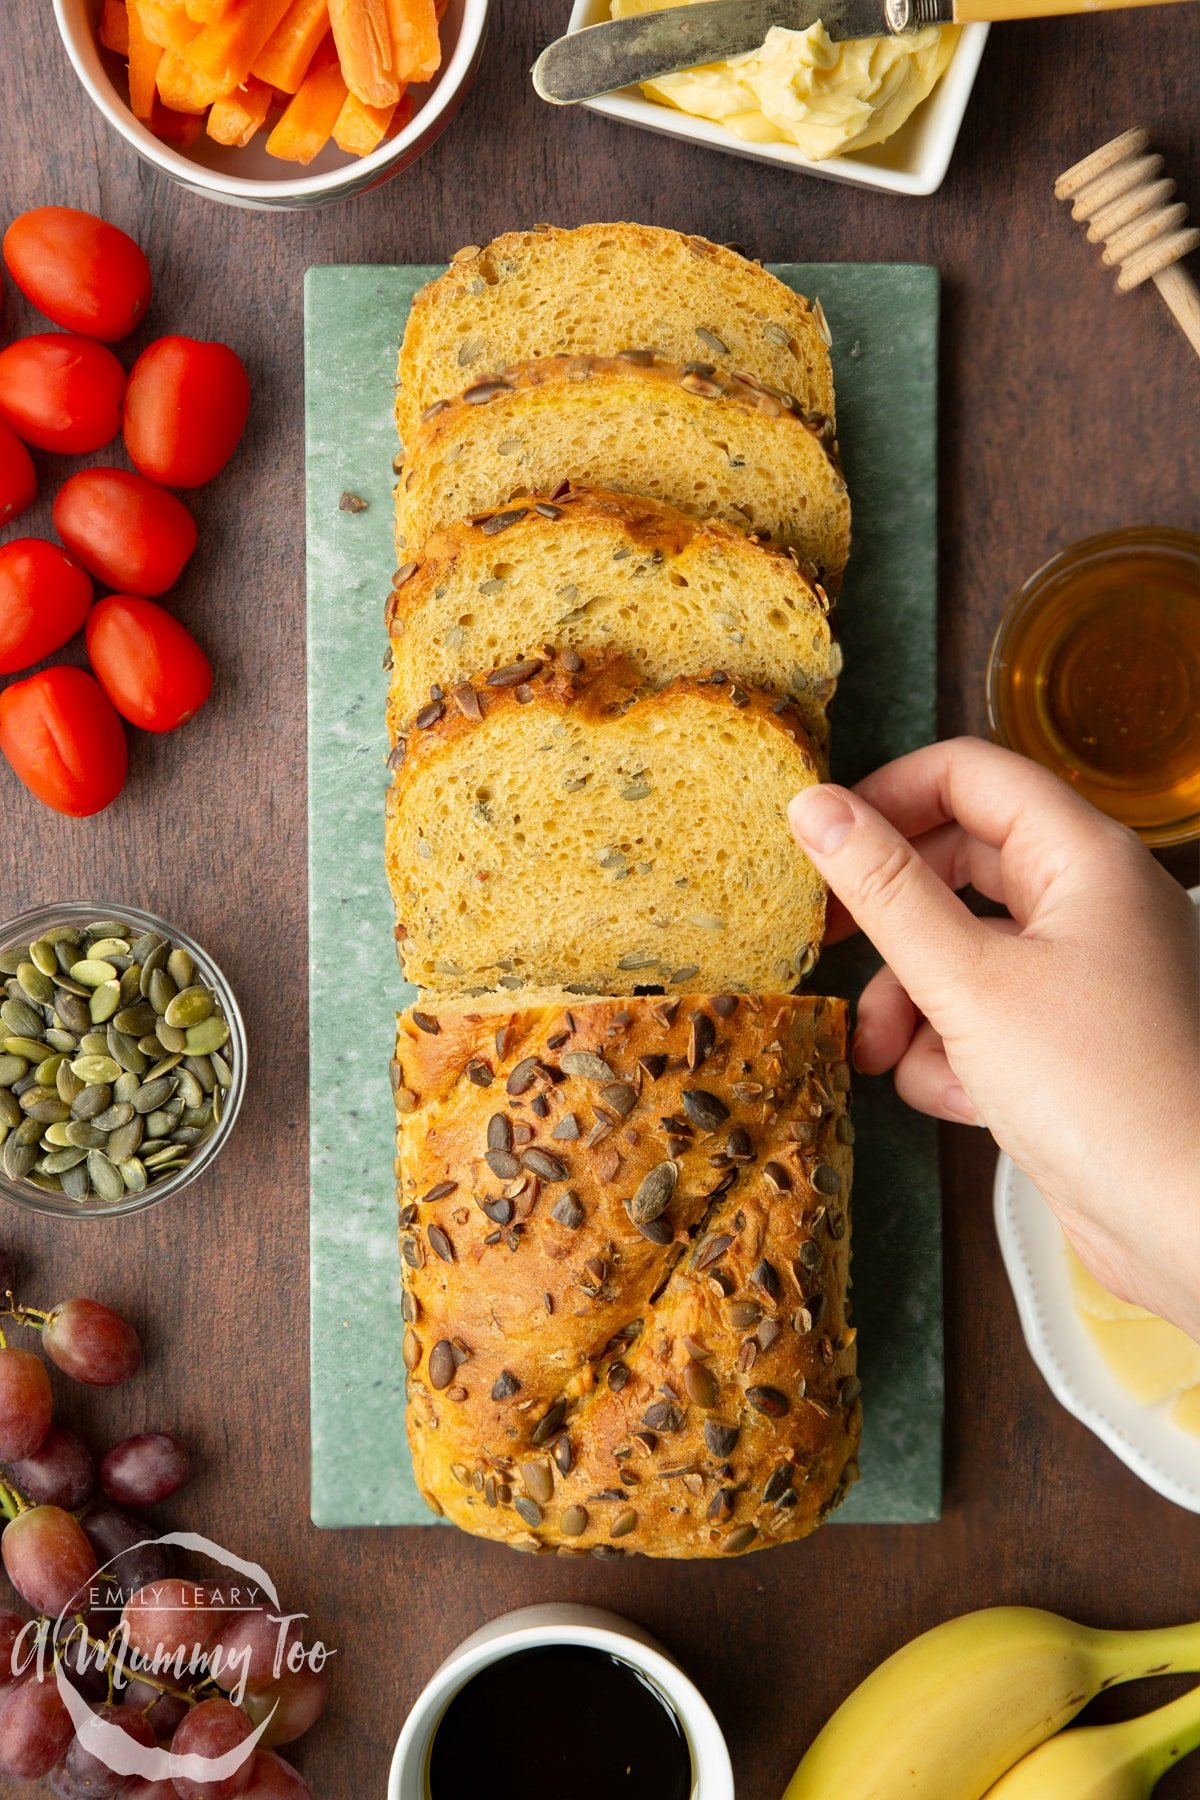 A sliced loaf of pumpkin seed bread on a board. A hand reaches for a slice.